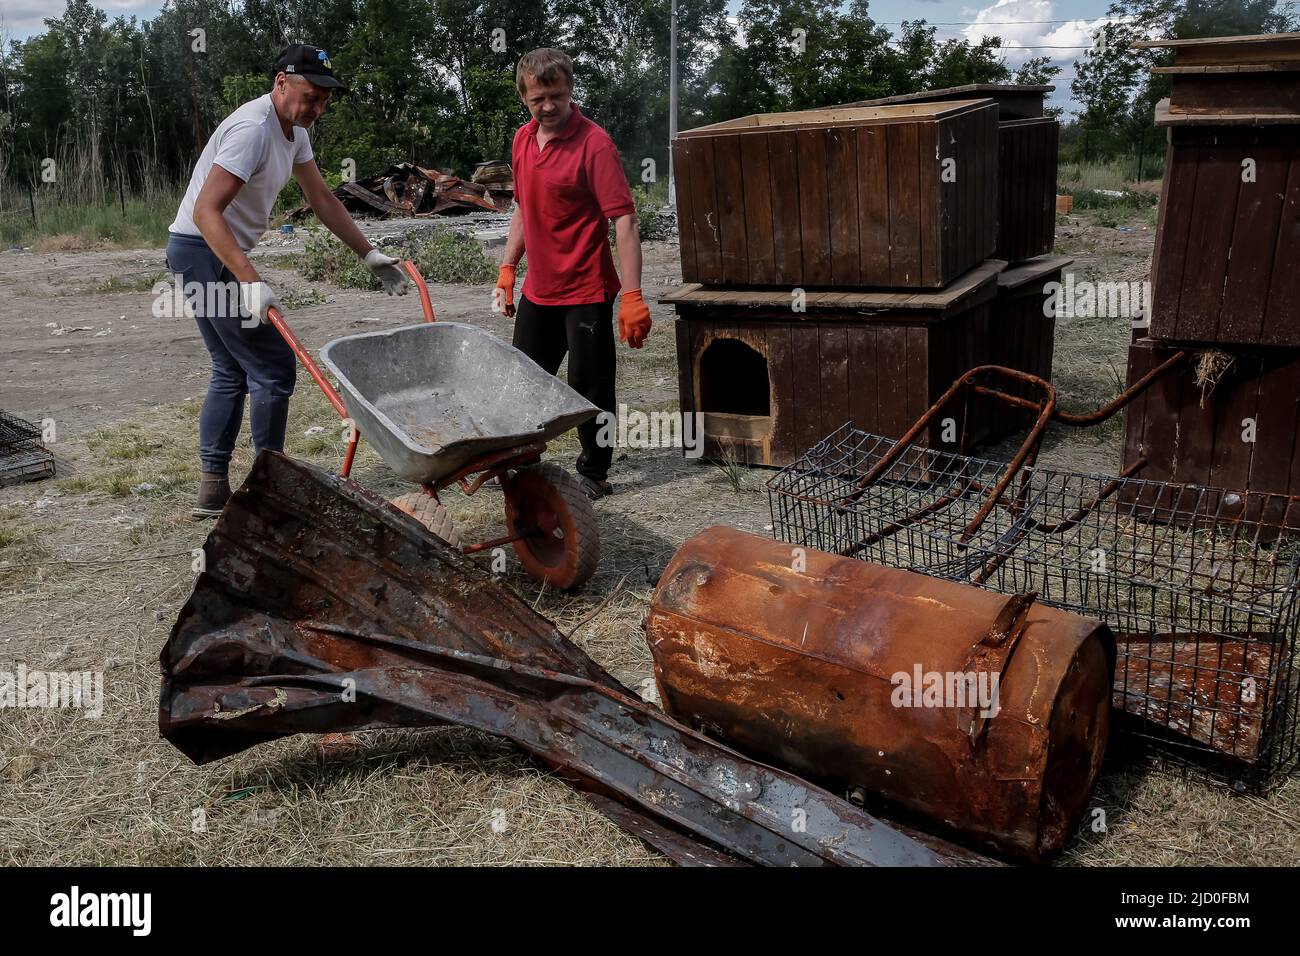 Workers clear the space of a city shelter burned during Russian attack in  Irpin in Kiev Oblast, Ukraine on June 16, 2022. The space will be used by  new animal NGO -